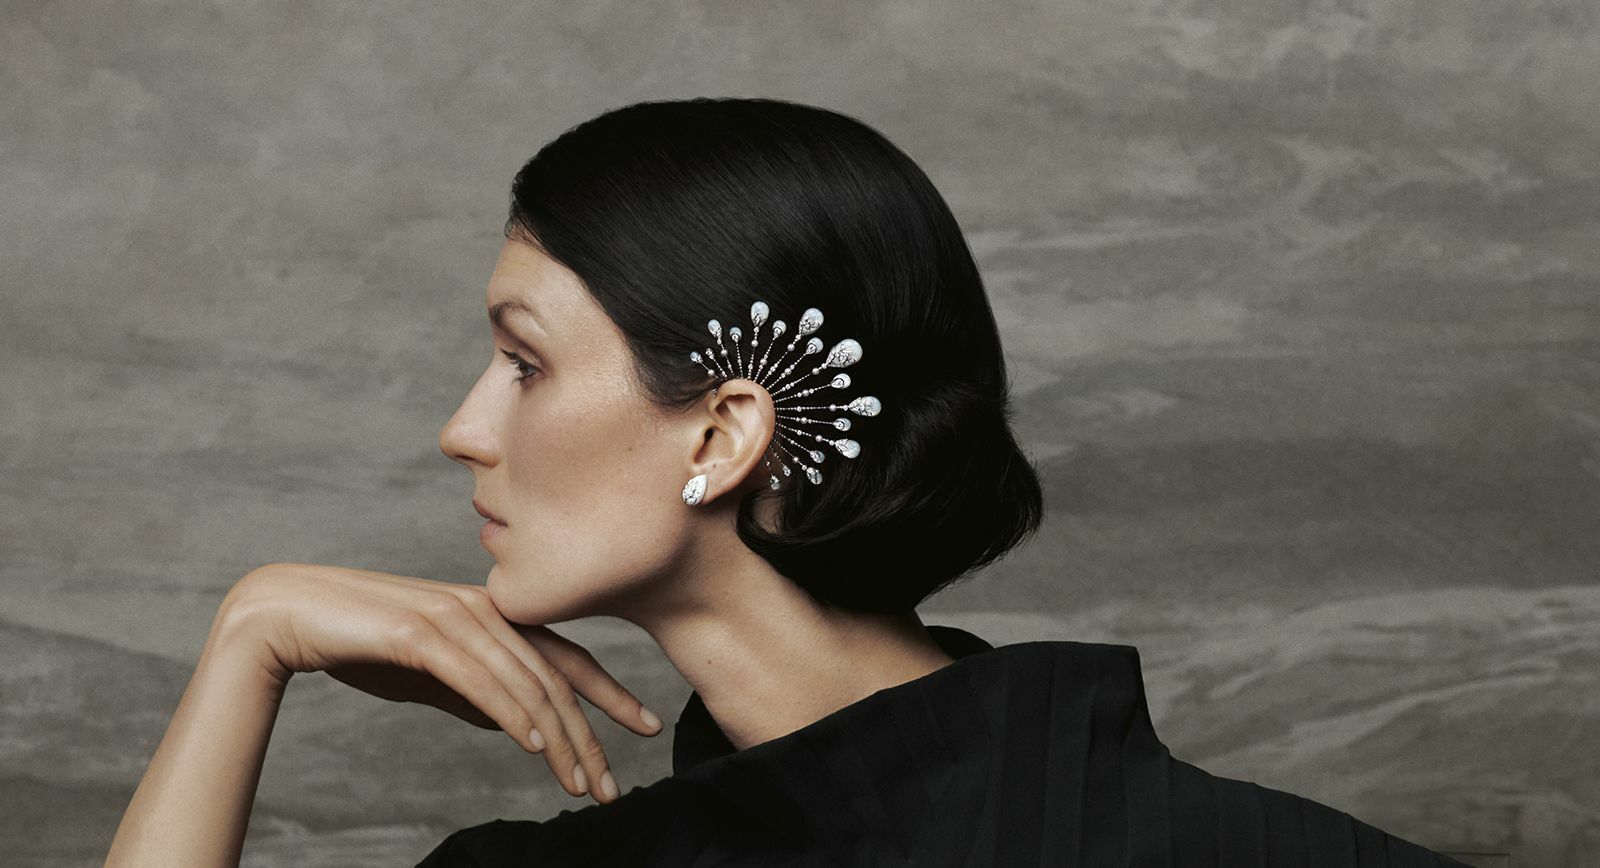 Boucheron New Padma Nacre asymmetrical earrings from the Histoire de Style New Maharajahs High Jewellery Collection